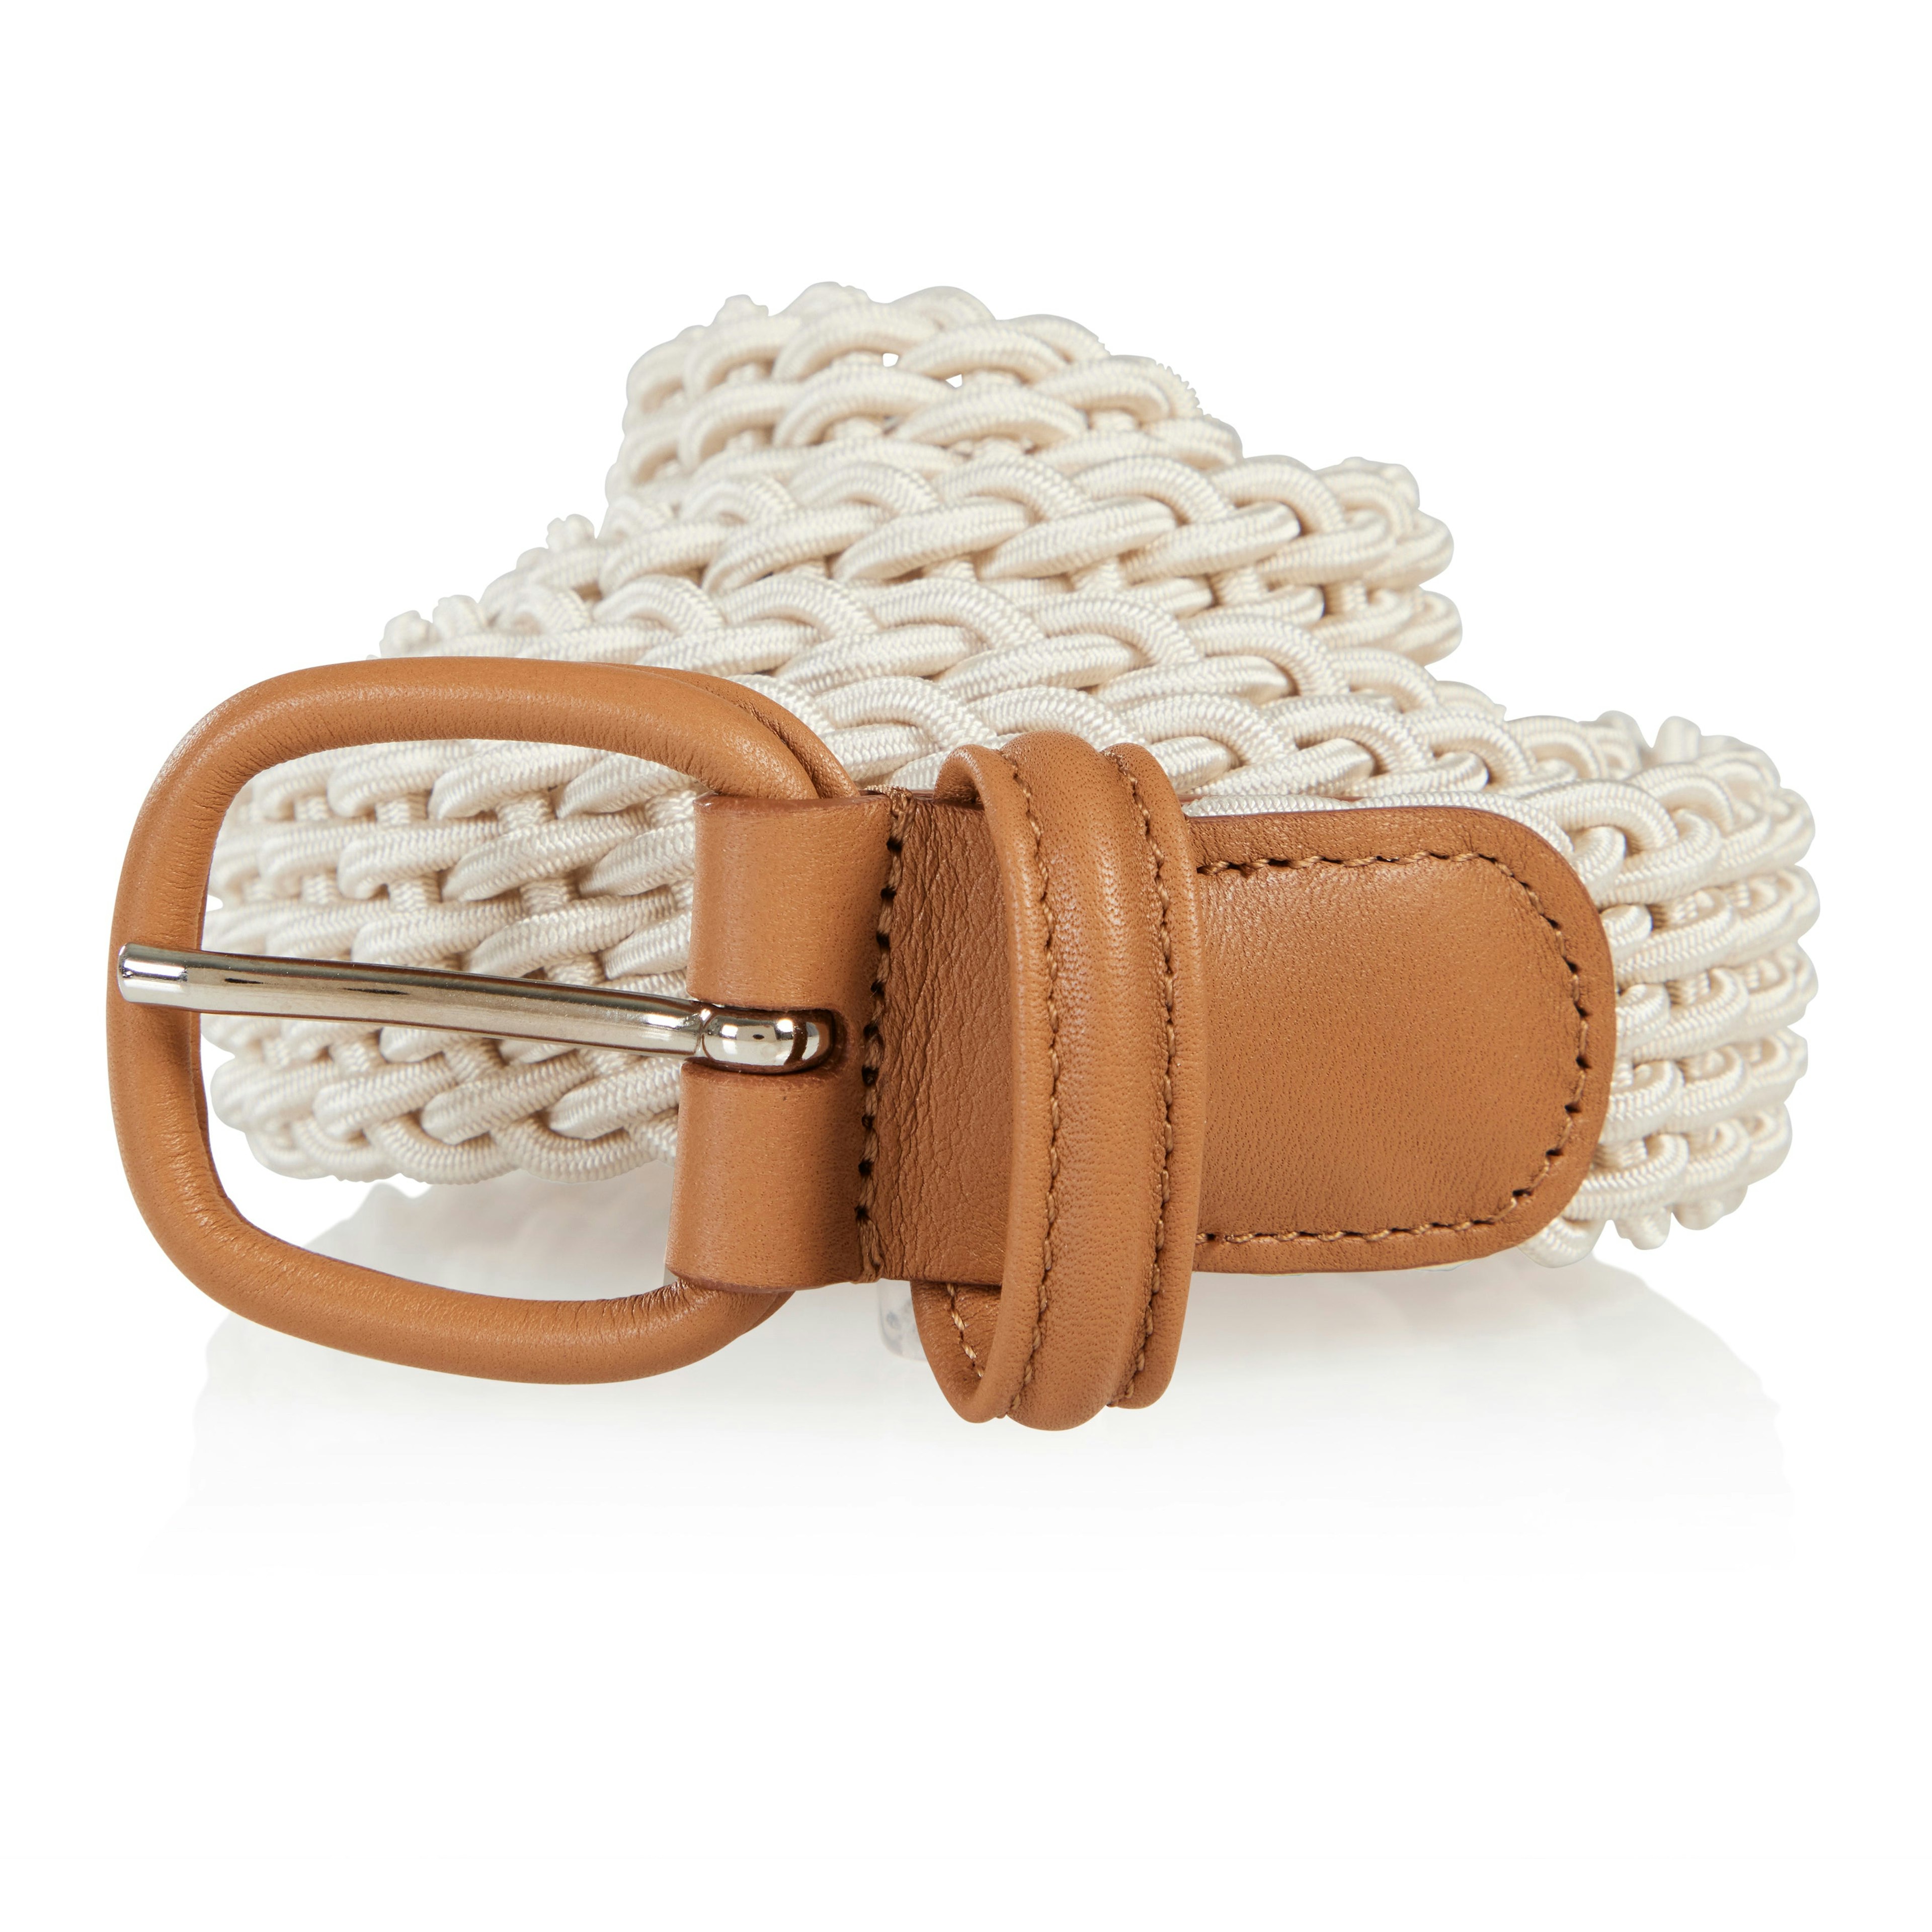 Anderson's Brown Woven Leather Belt, Brown